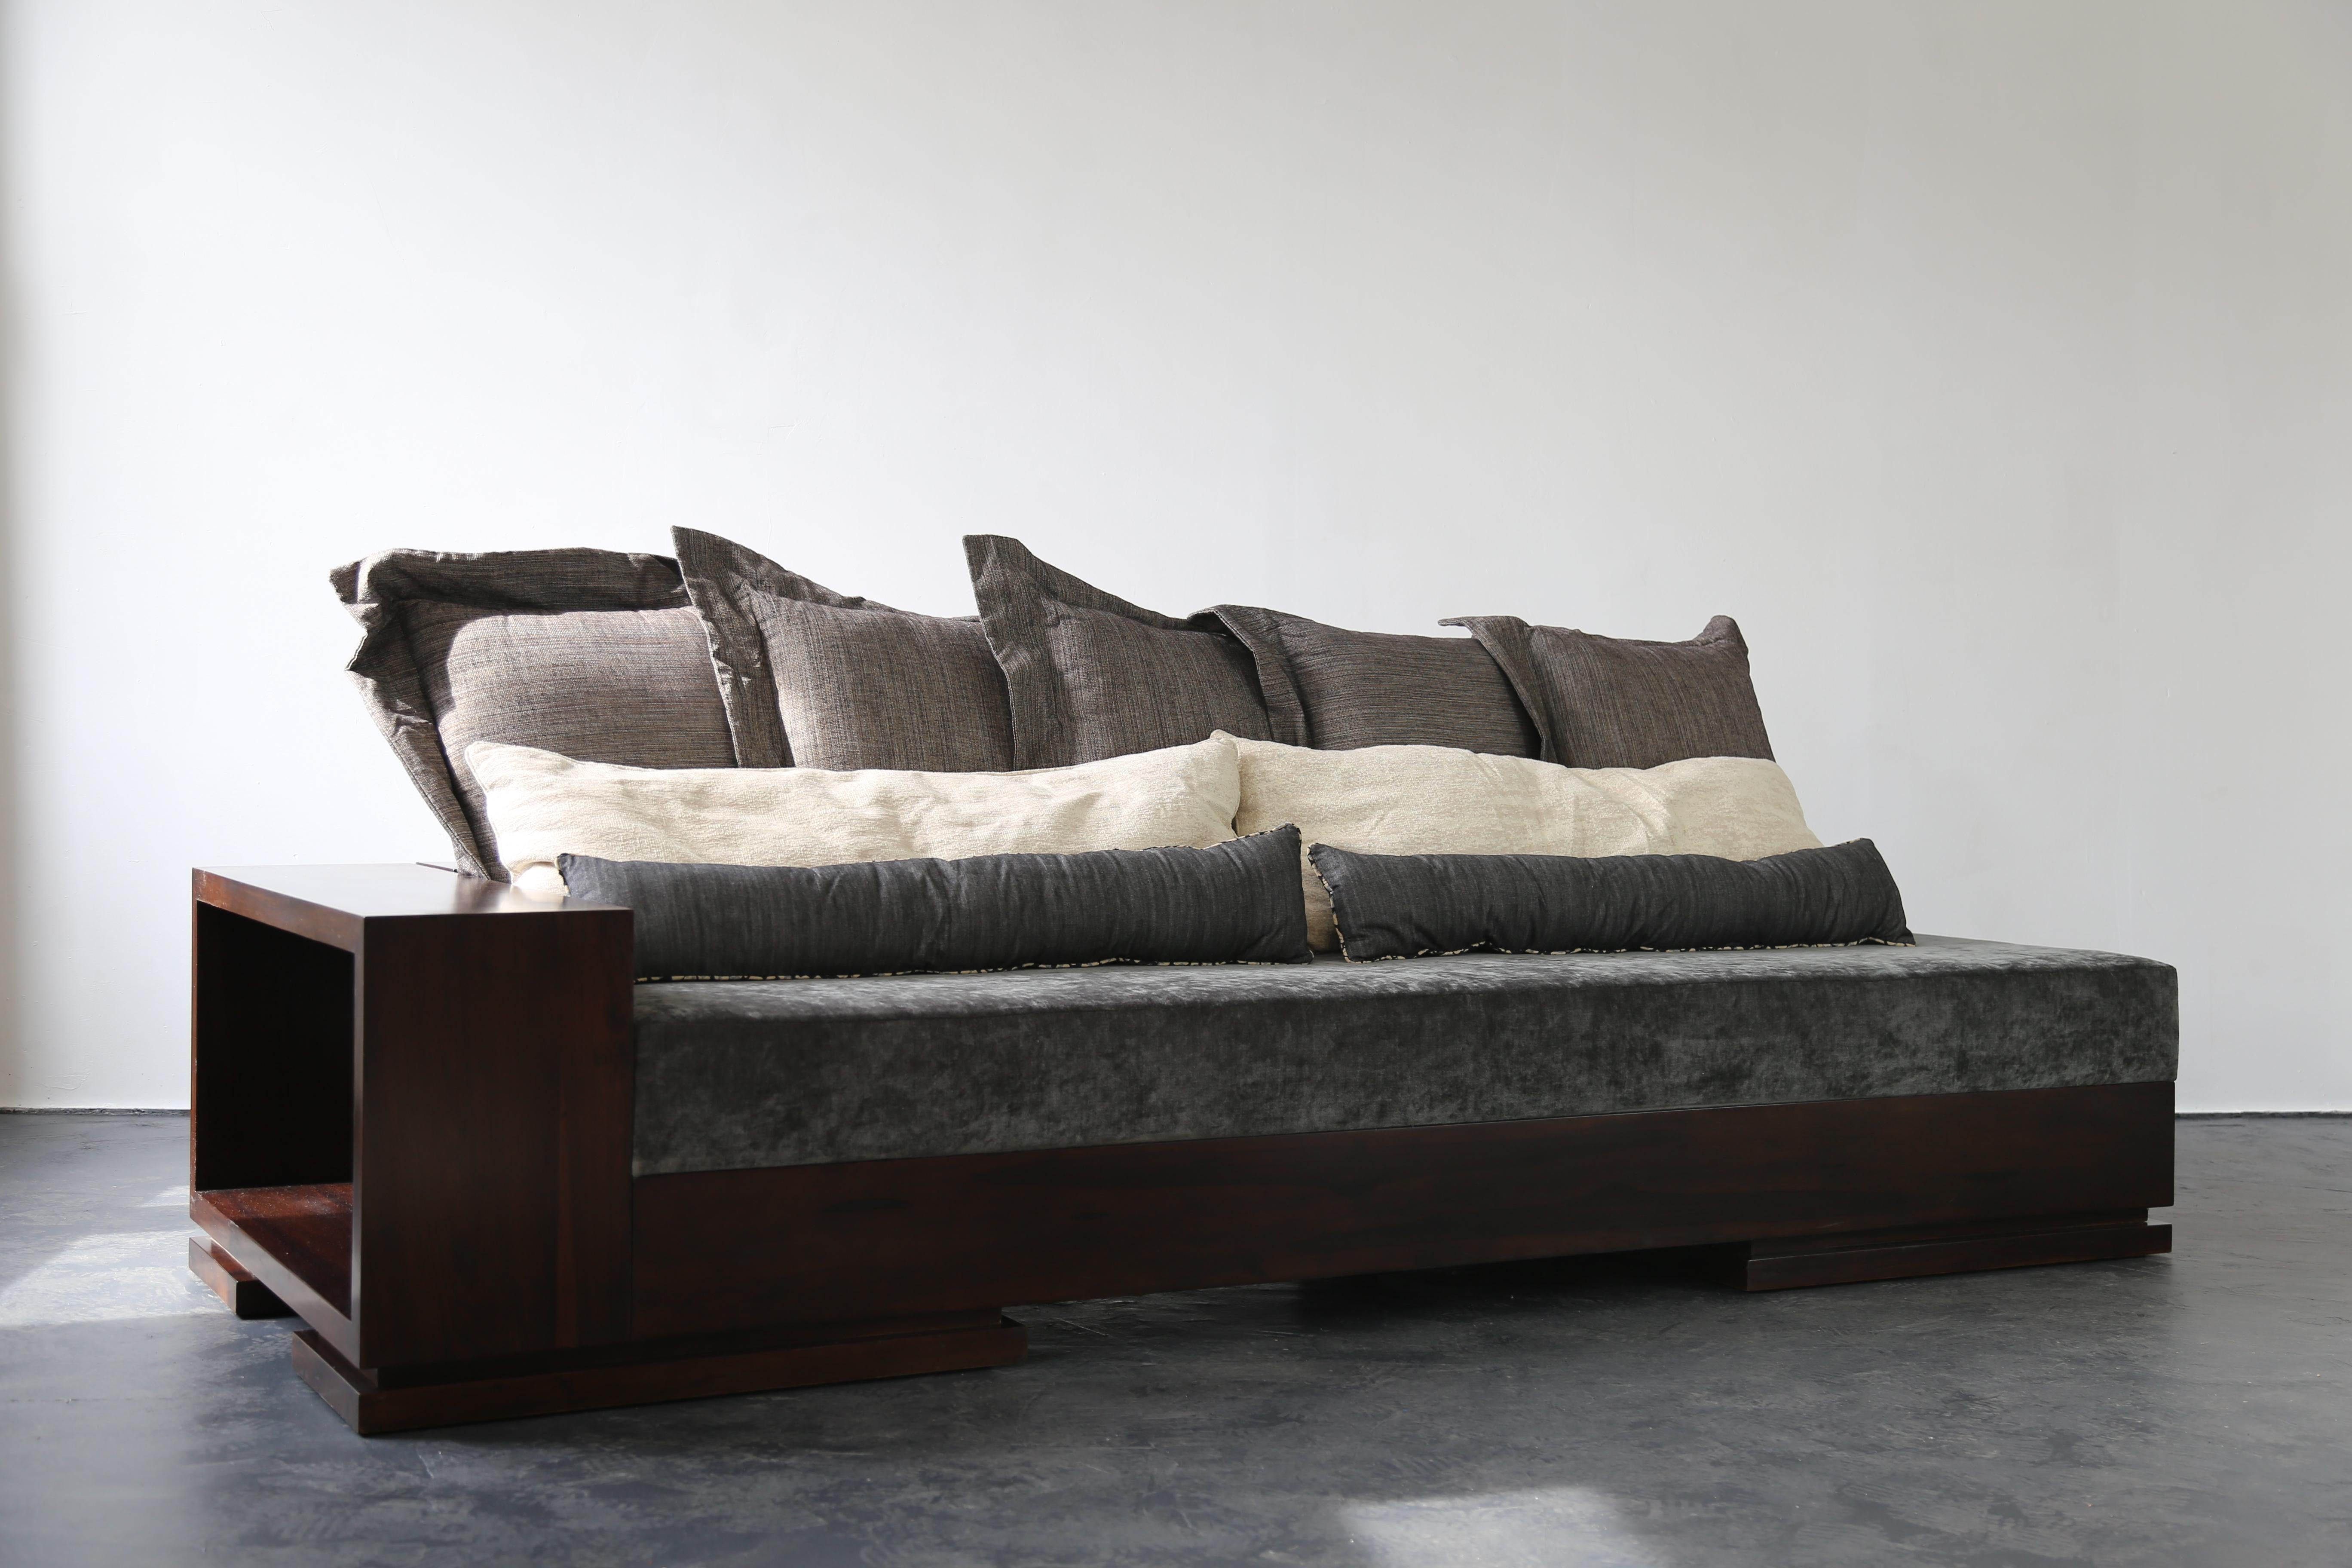 The Patone Sofa balances a modern design with natural materials and can be made in any size with any upholstery material.  Shown here in several versions, it can be specified with several different pillow combinations, as well as different arm and